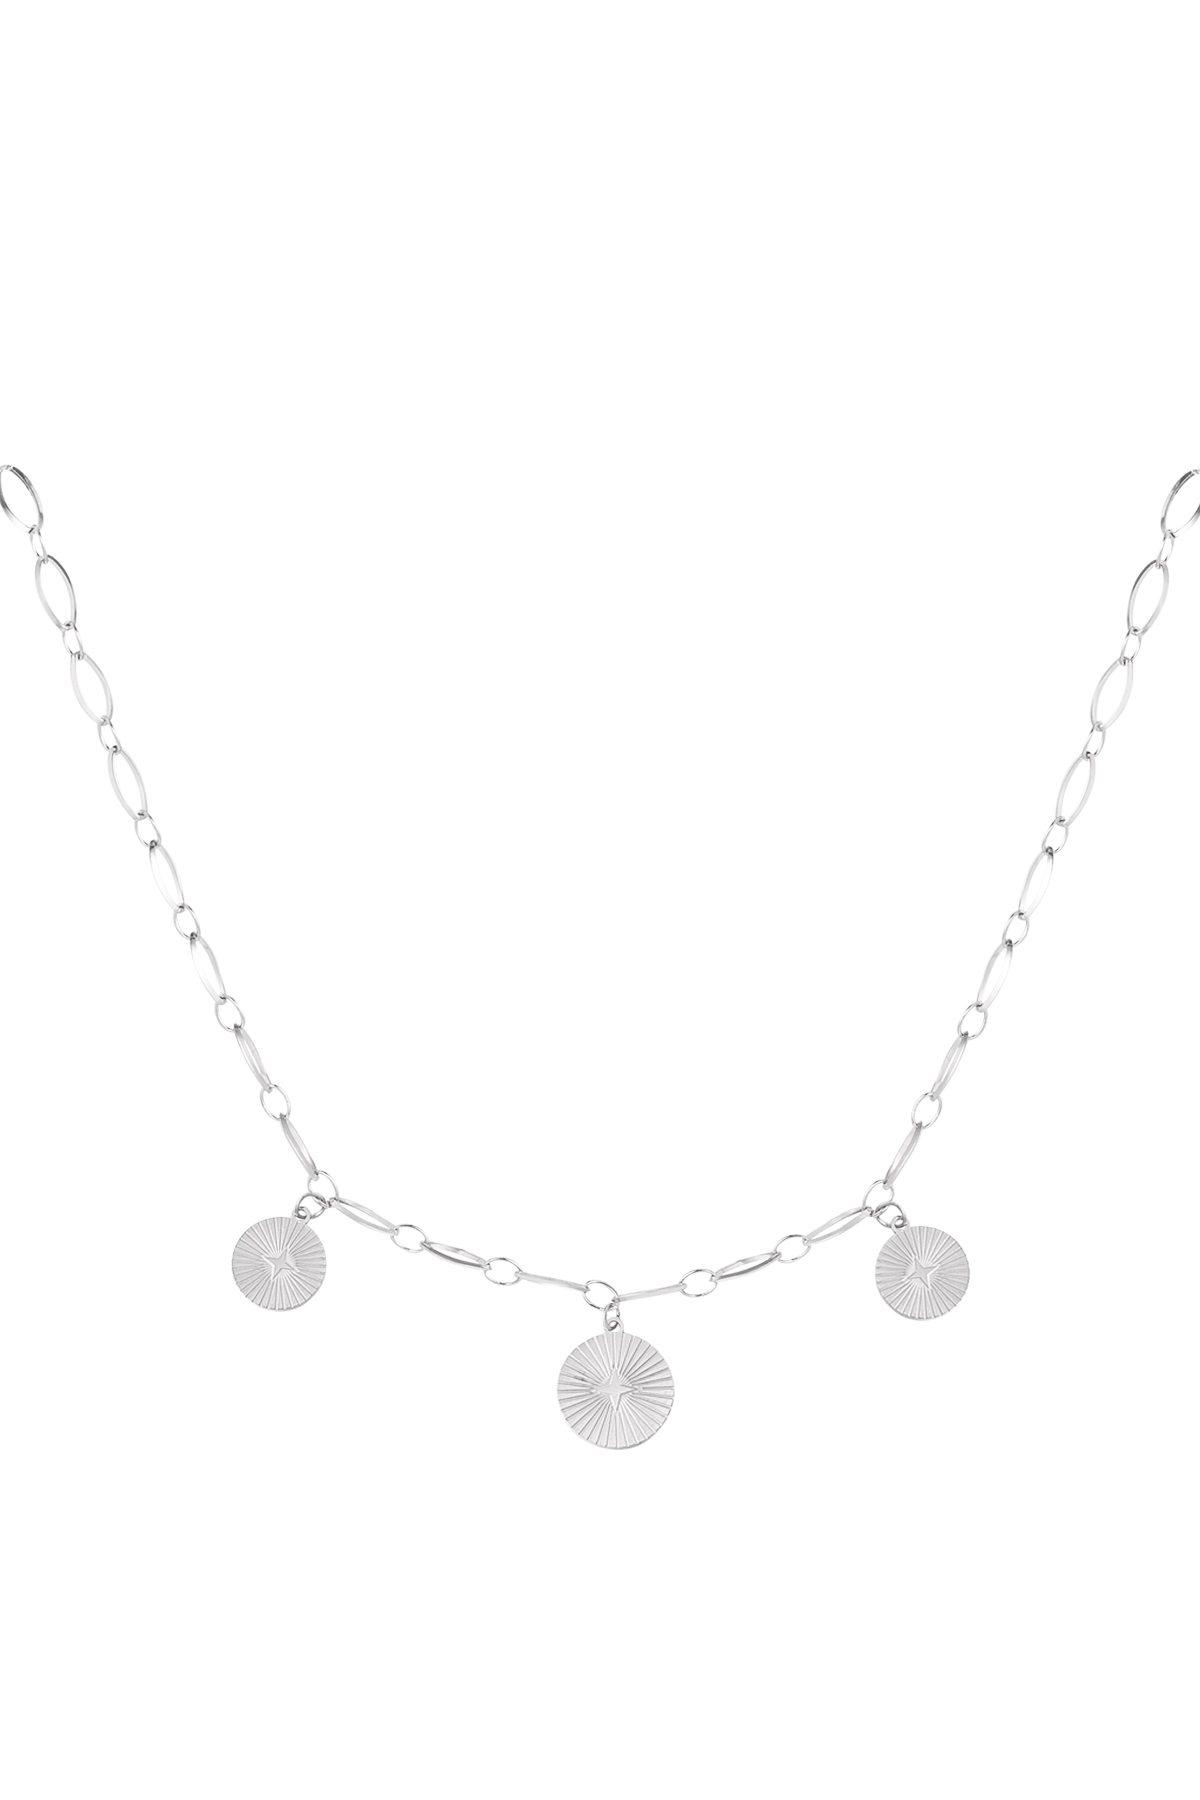 Necklace three coins - silver